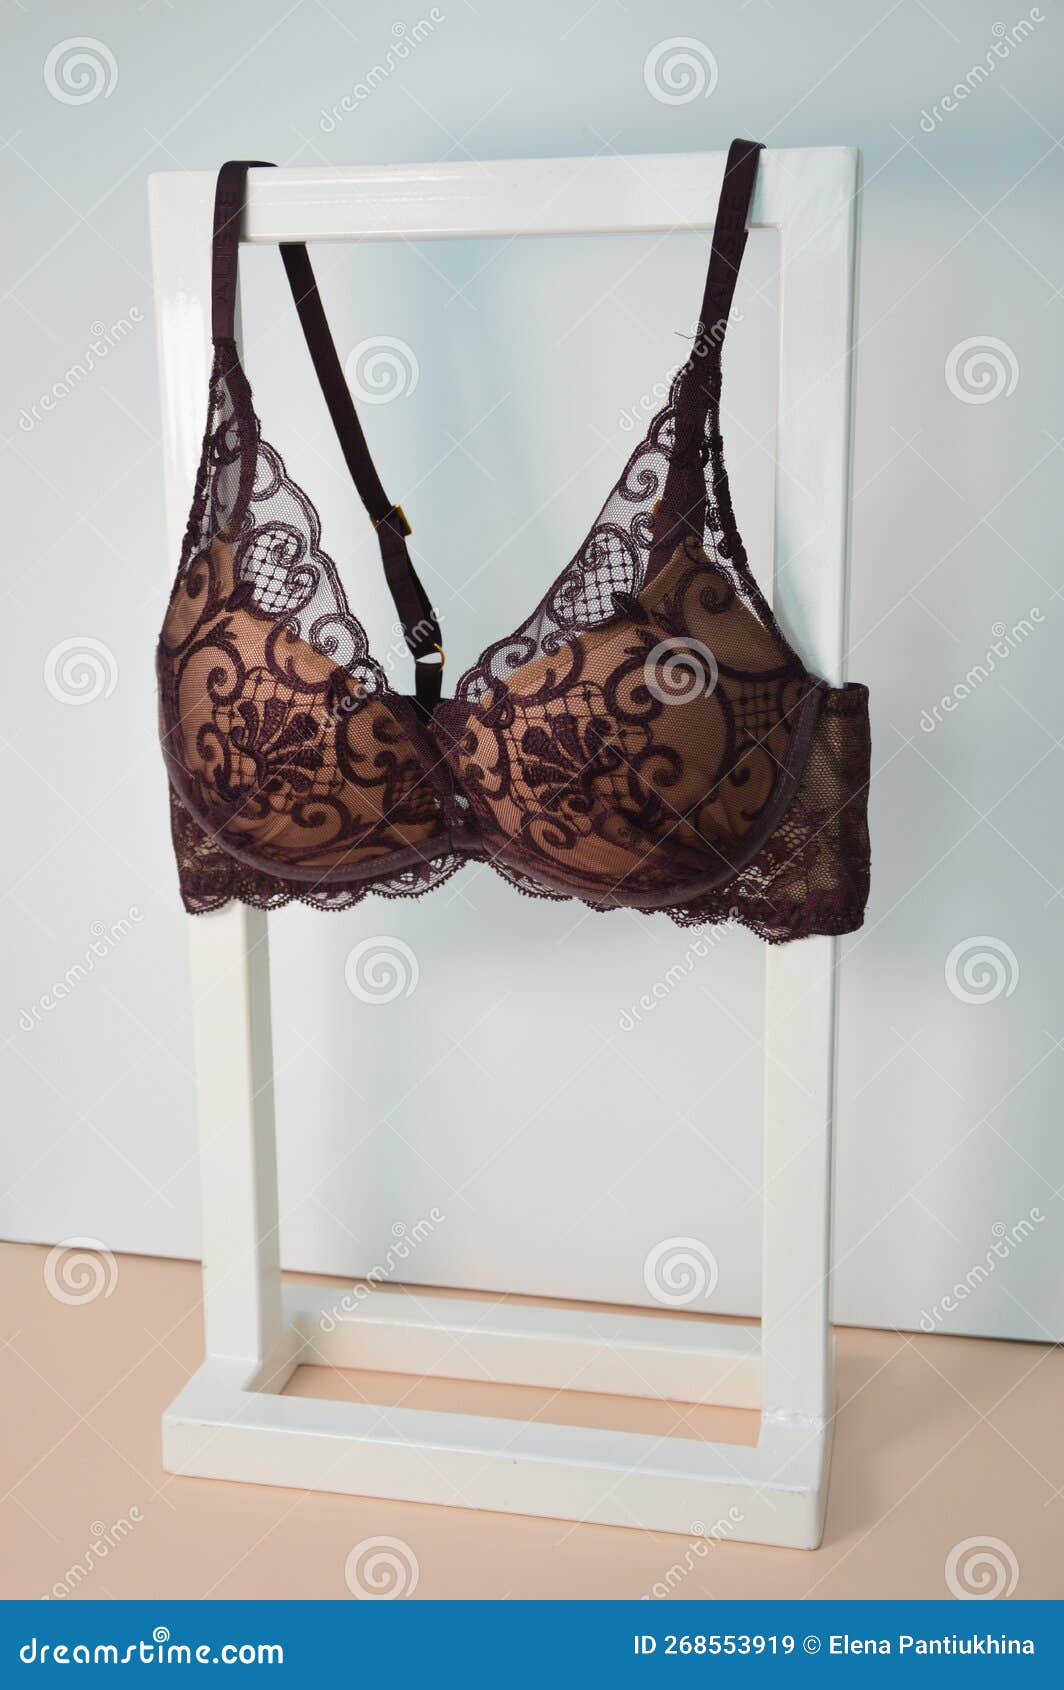 Women S Lacy Dark Purple Plum Bra Hangs on a Stand on a White and